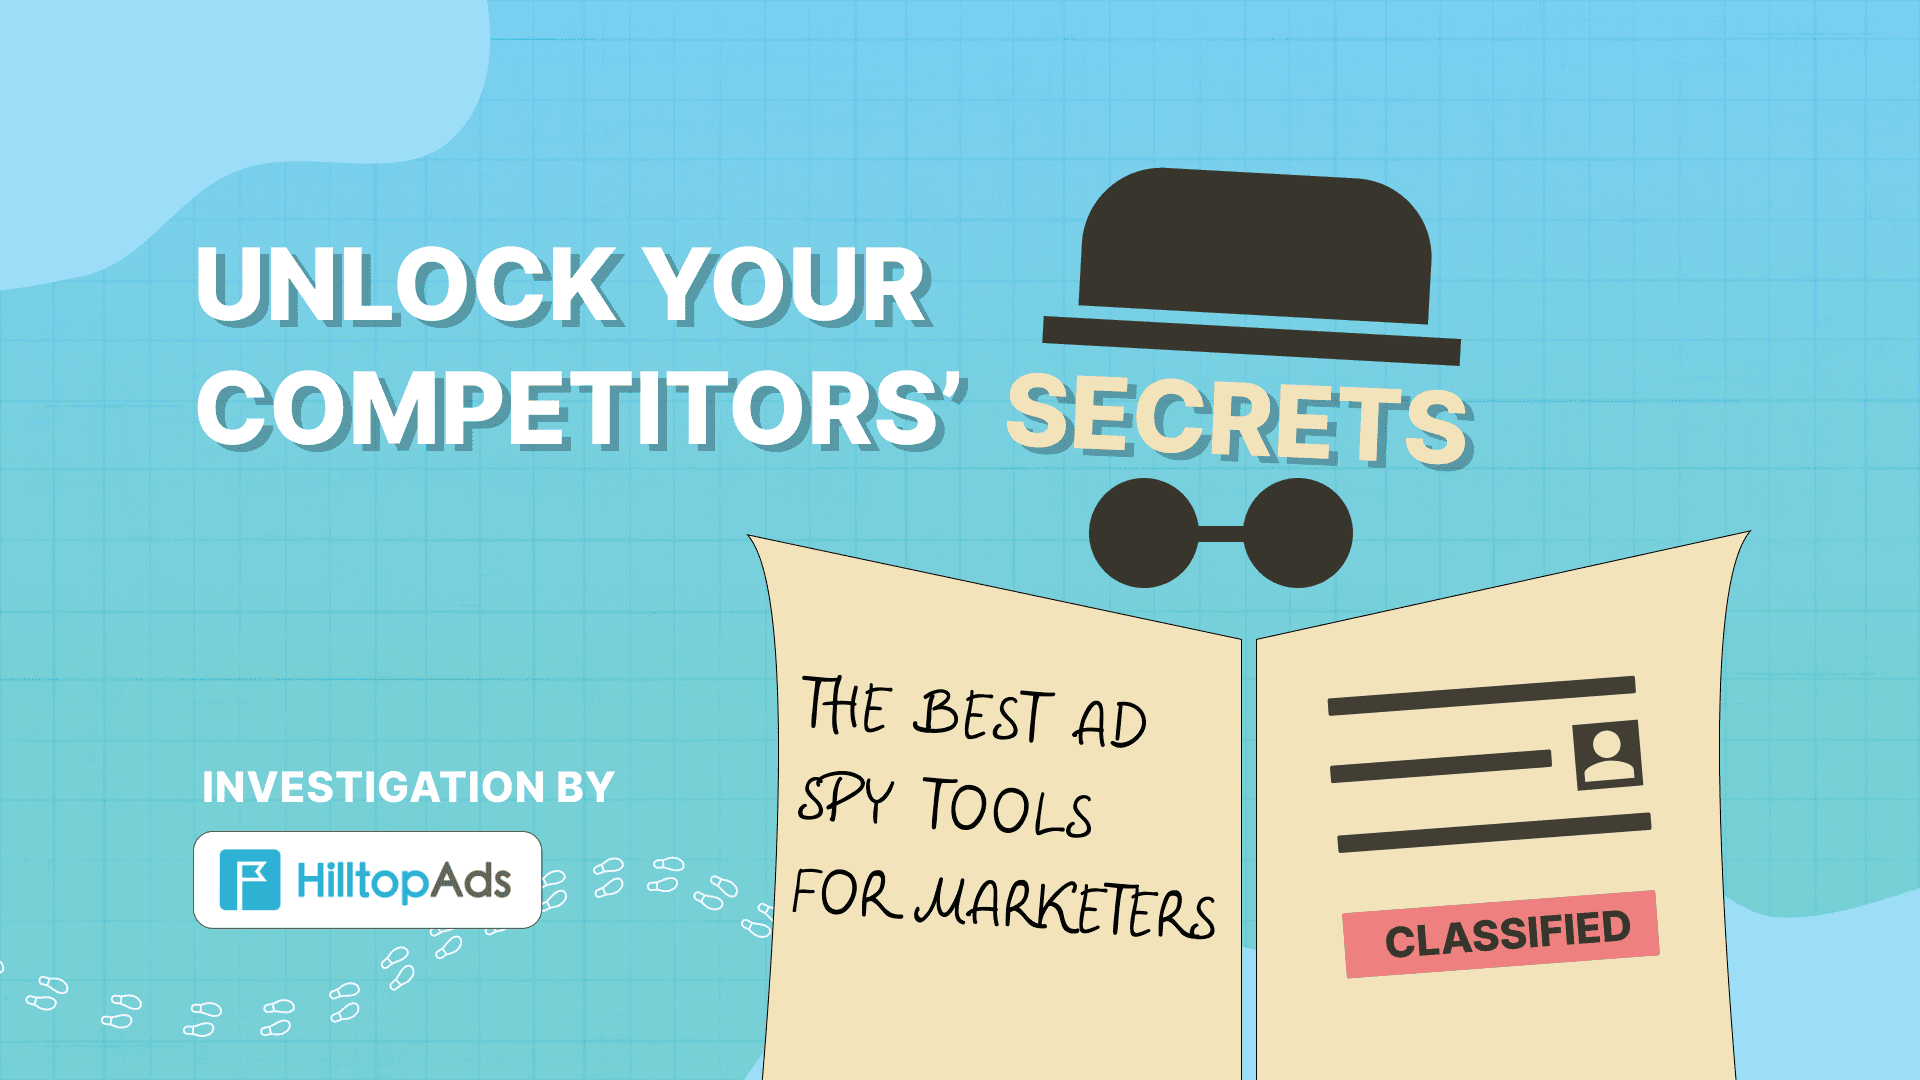 Unlock Your Competitors' Secrets: the Best Ad Spy Tools for Marketers